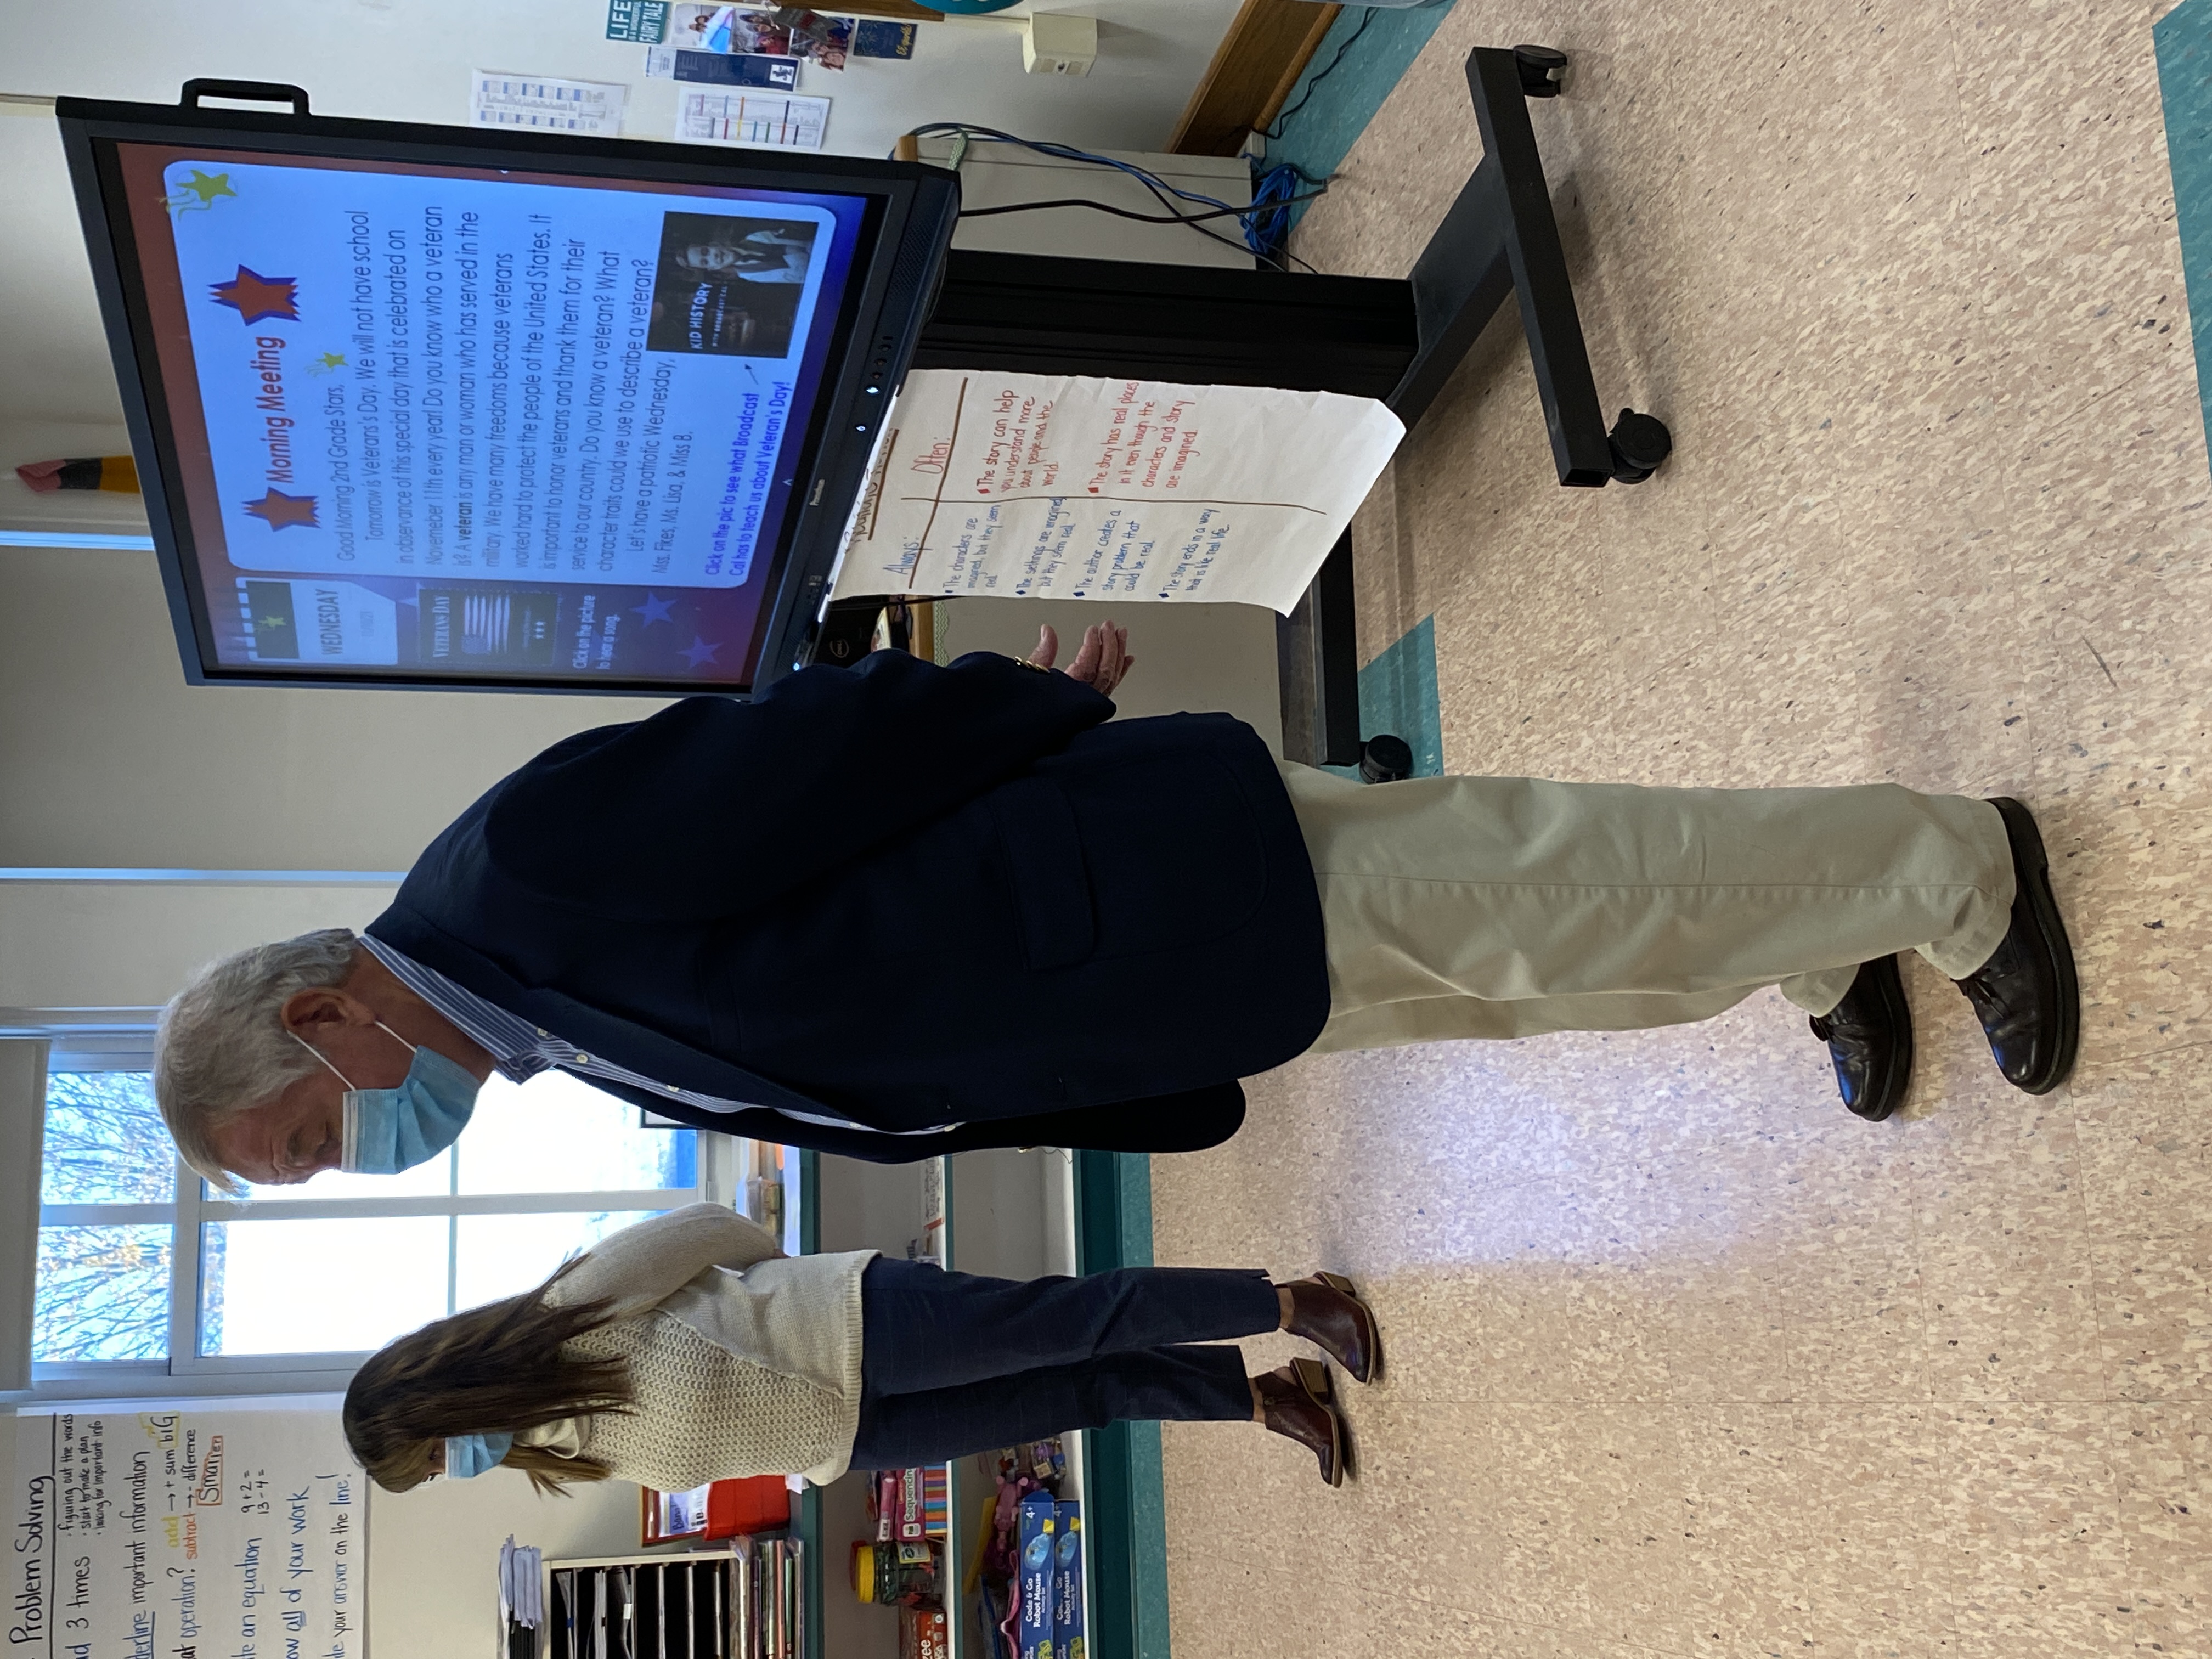 Veteran Mr. Martin speaks with an EE class about his experiences